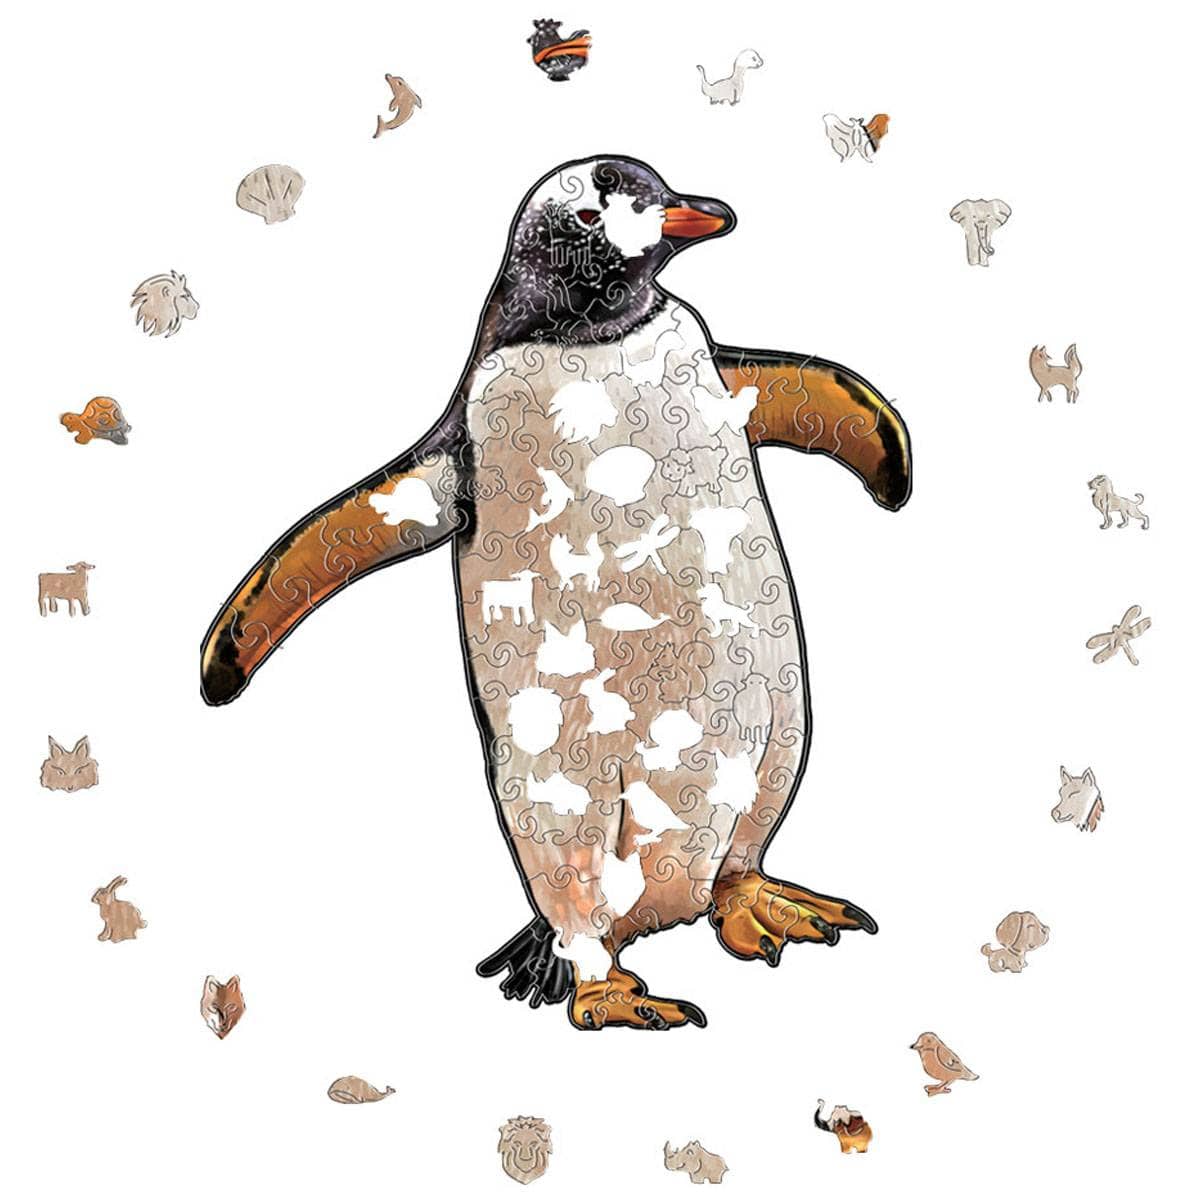 Penguin - Wooden Jigsaw Puzzle